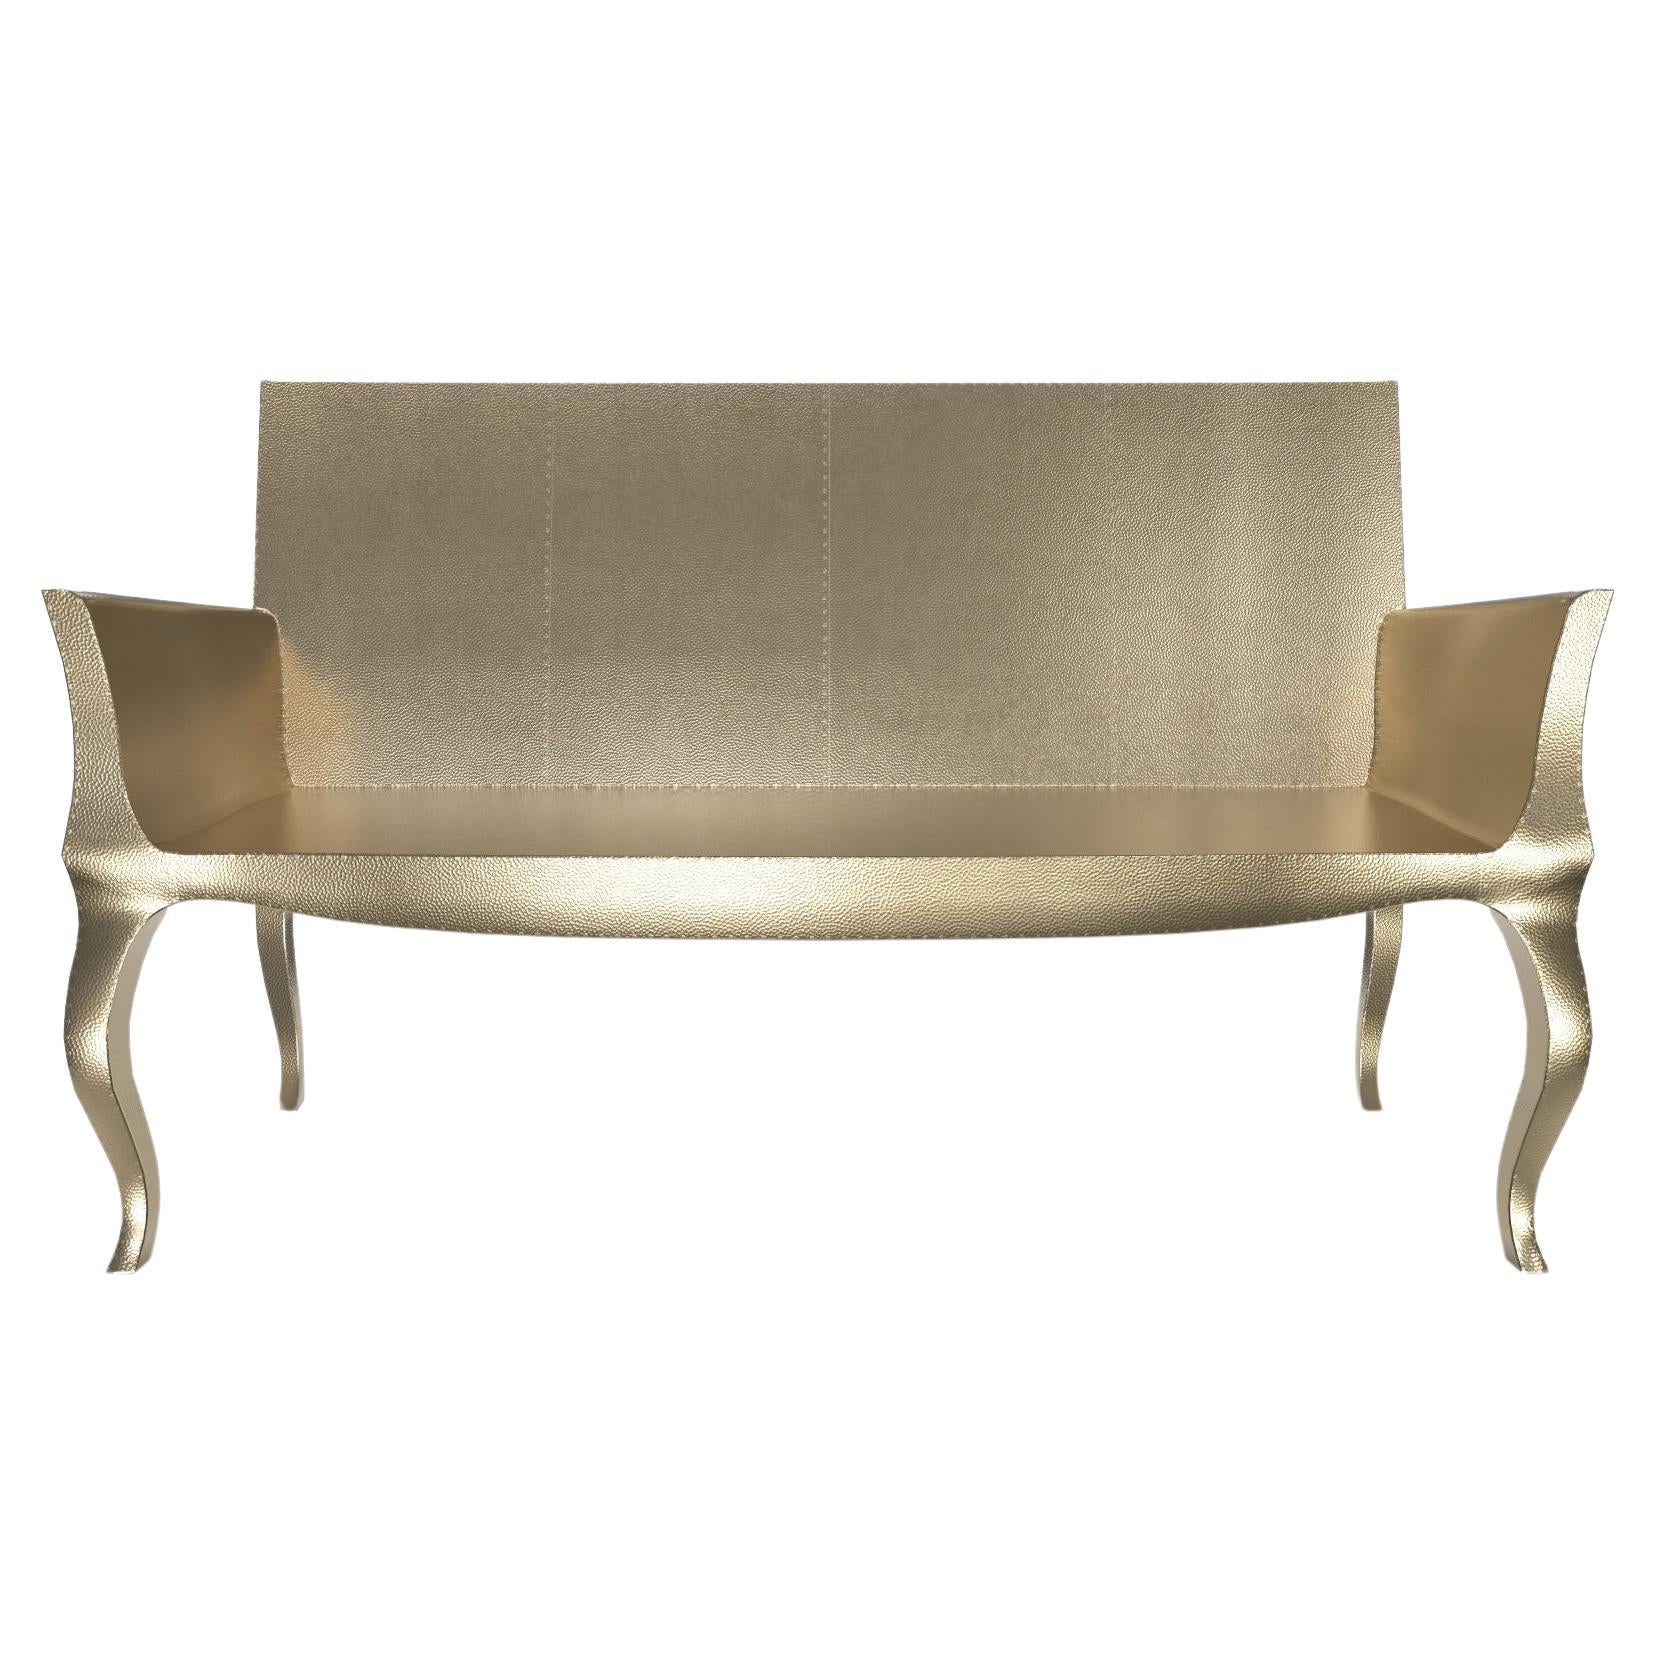 Louise Settee Art Deco Benches in Mid. Hammered Brass by Paul Mathieu For Sale